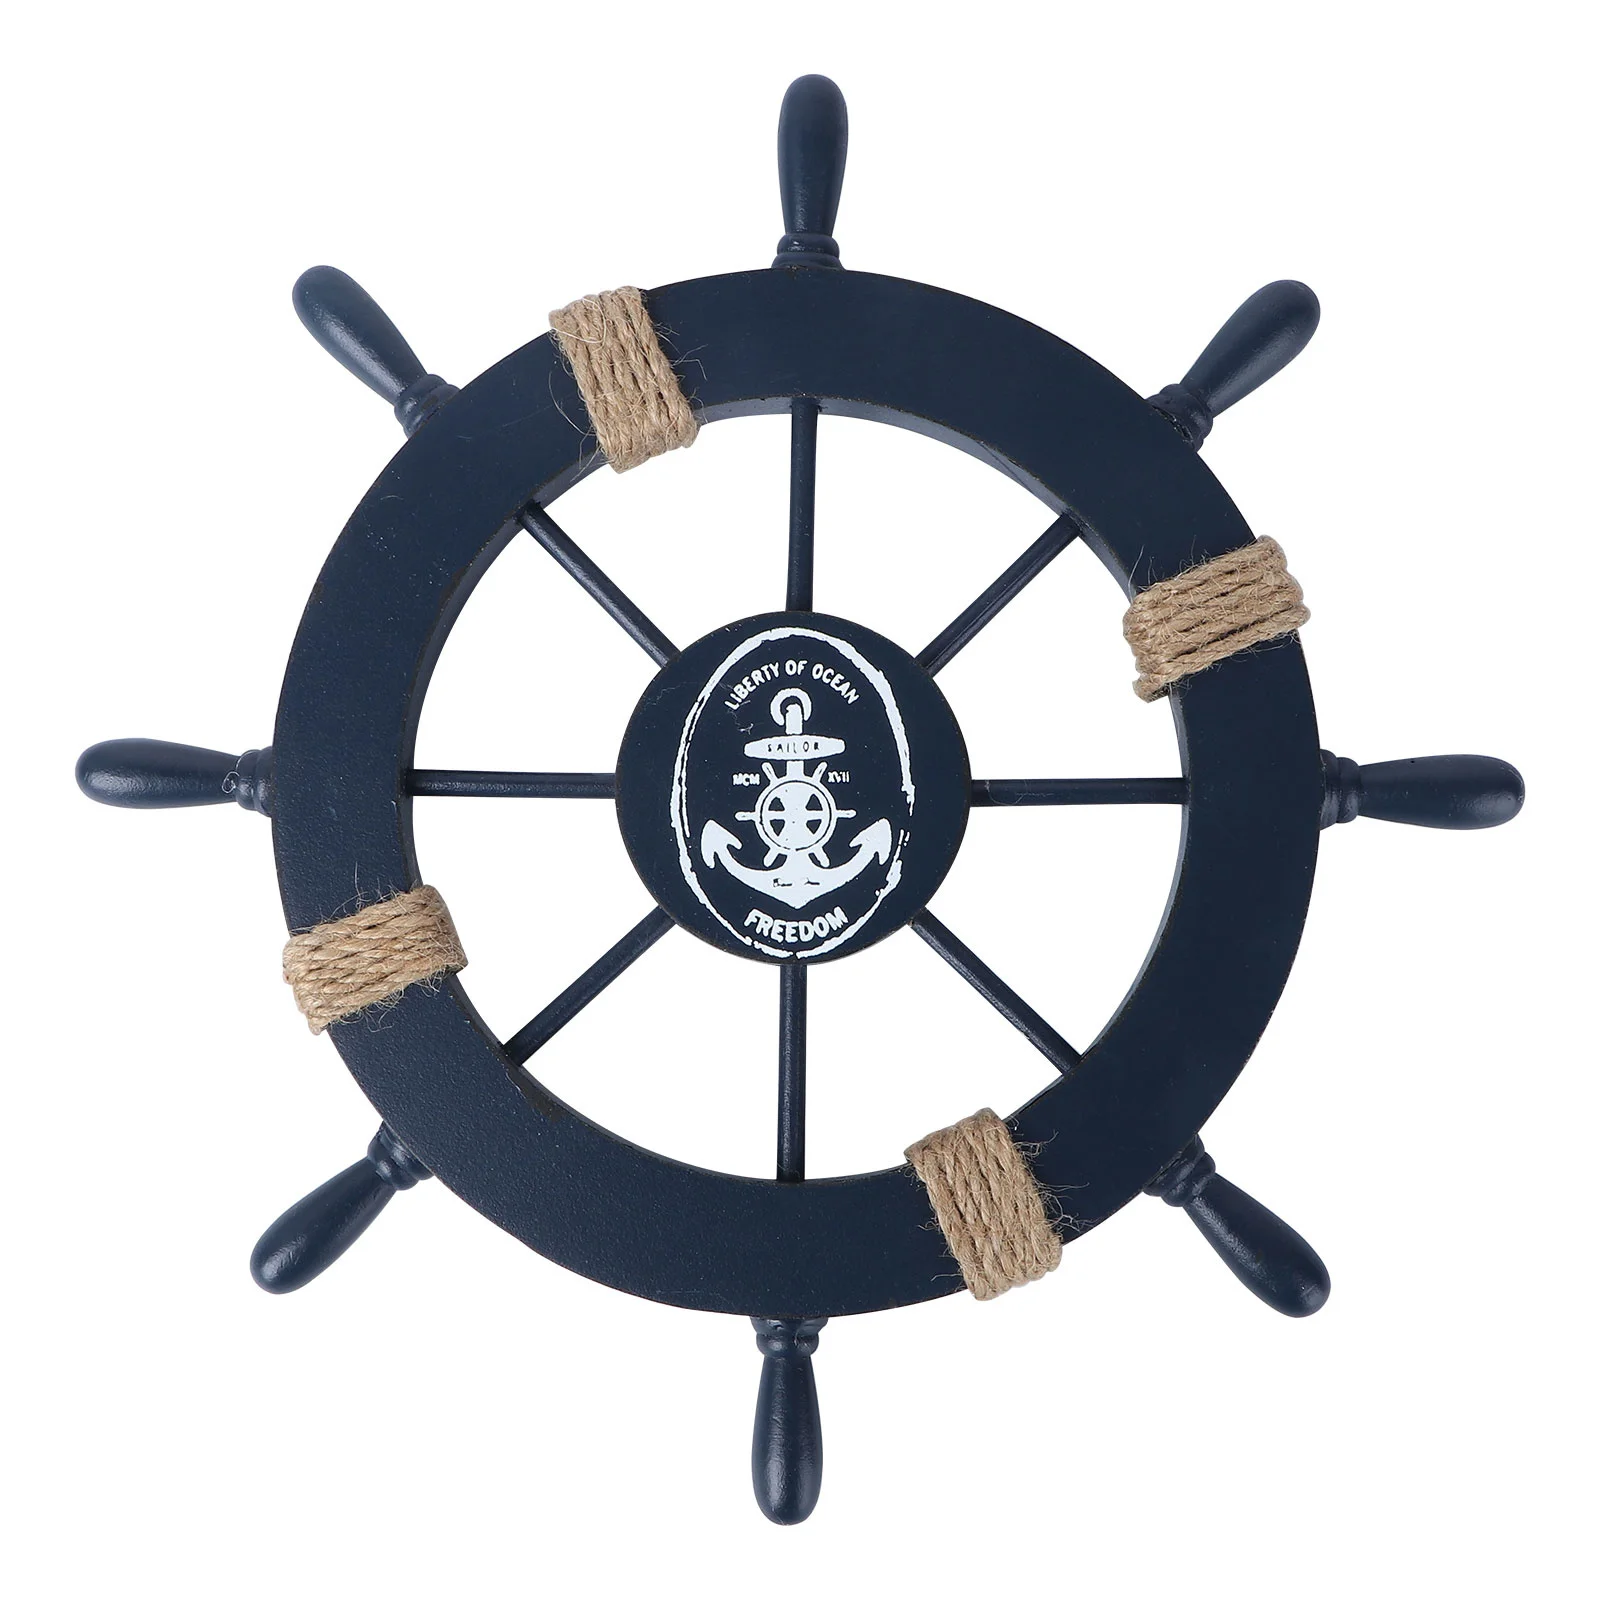 

Mediterranean Nautical Wooden Boat Ship Wheel Helm Home Wall Party Decoration croaker Sailboat pattern wheel helm